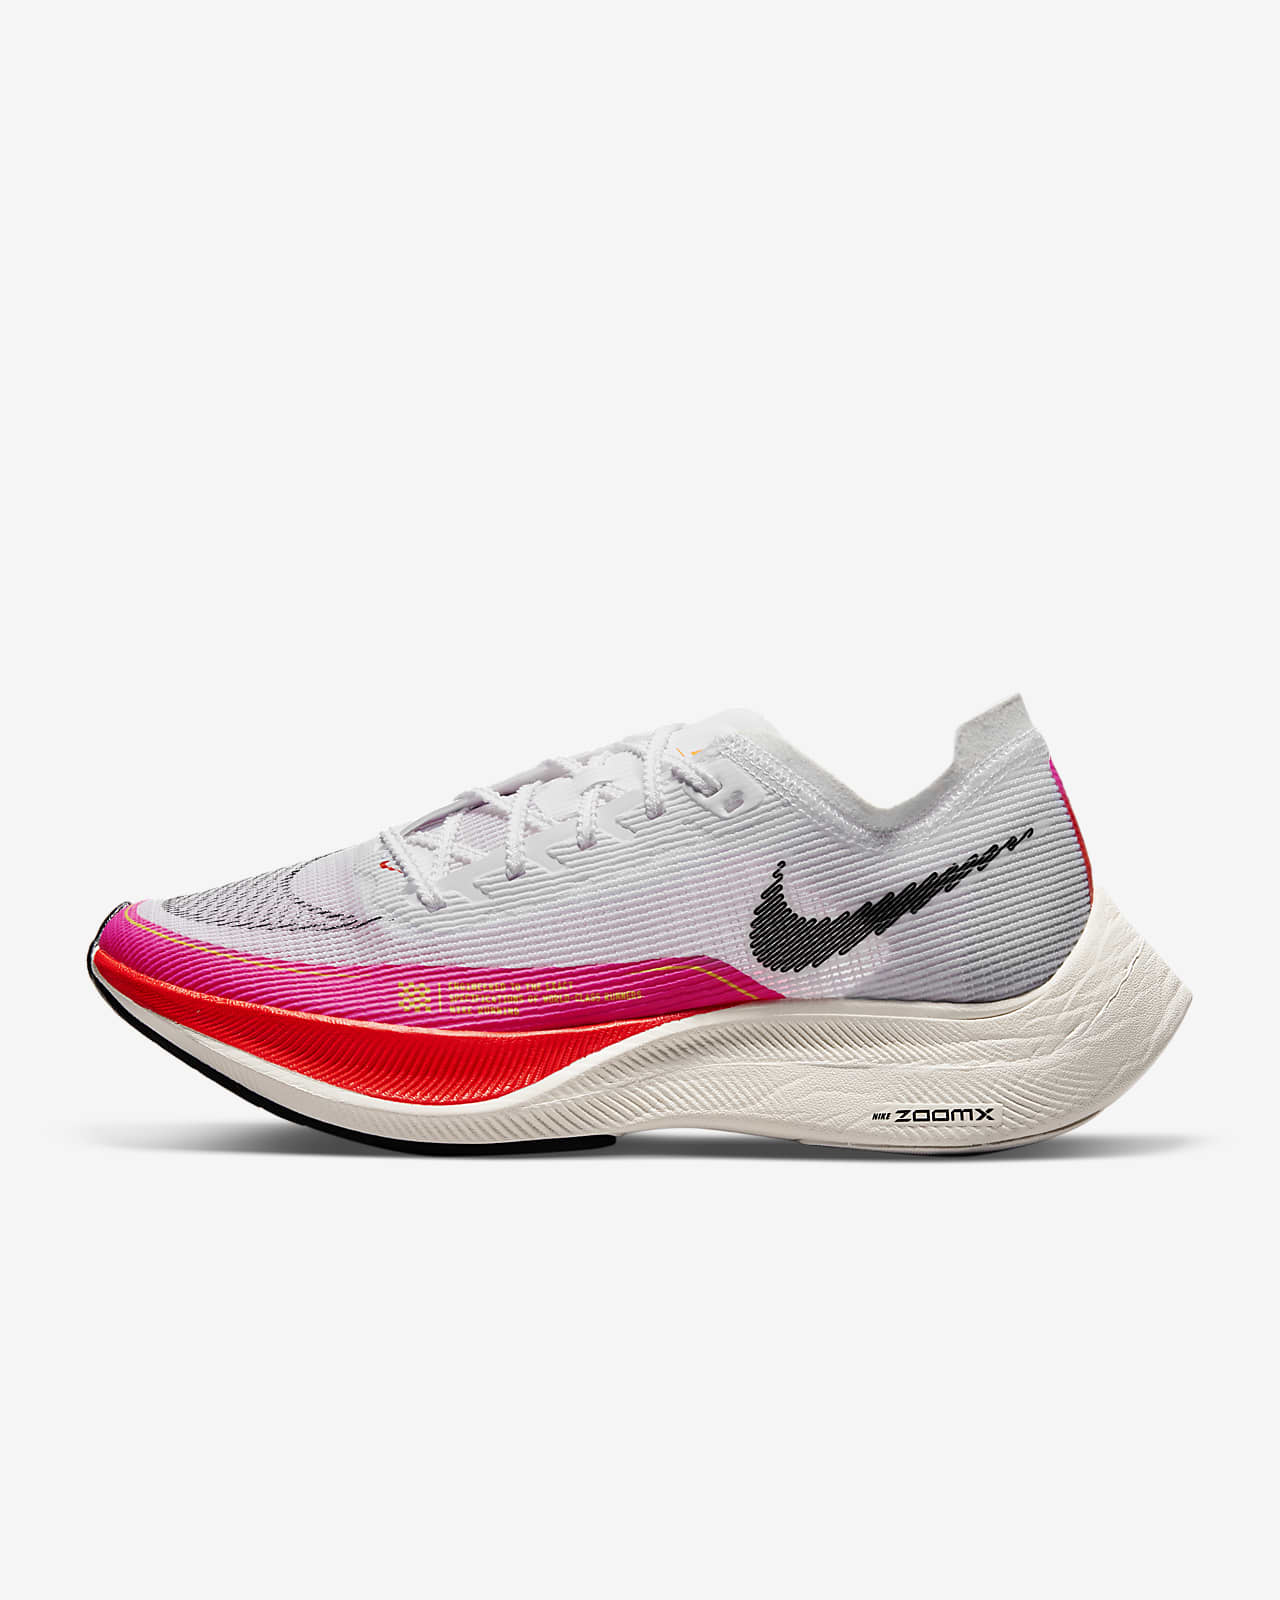 Nike ZoomX Vaporfly Next% 2 Women's Road Racing Shoes